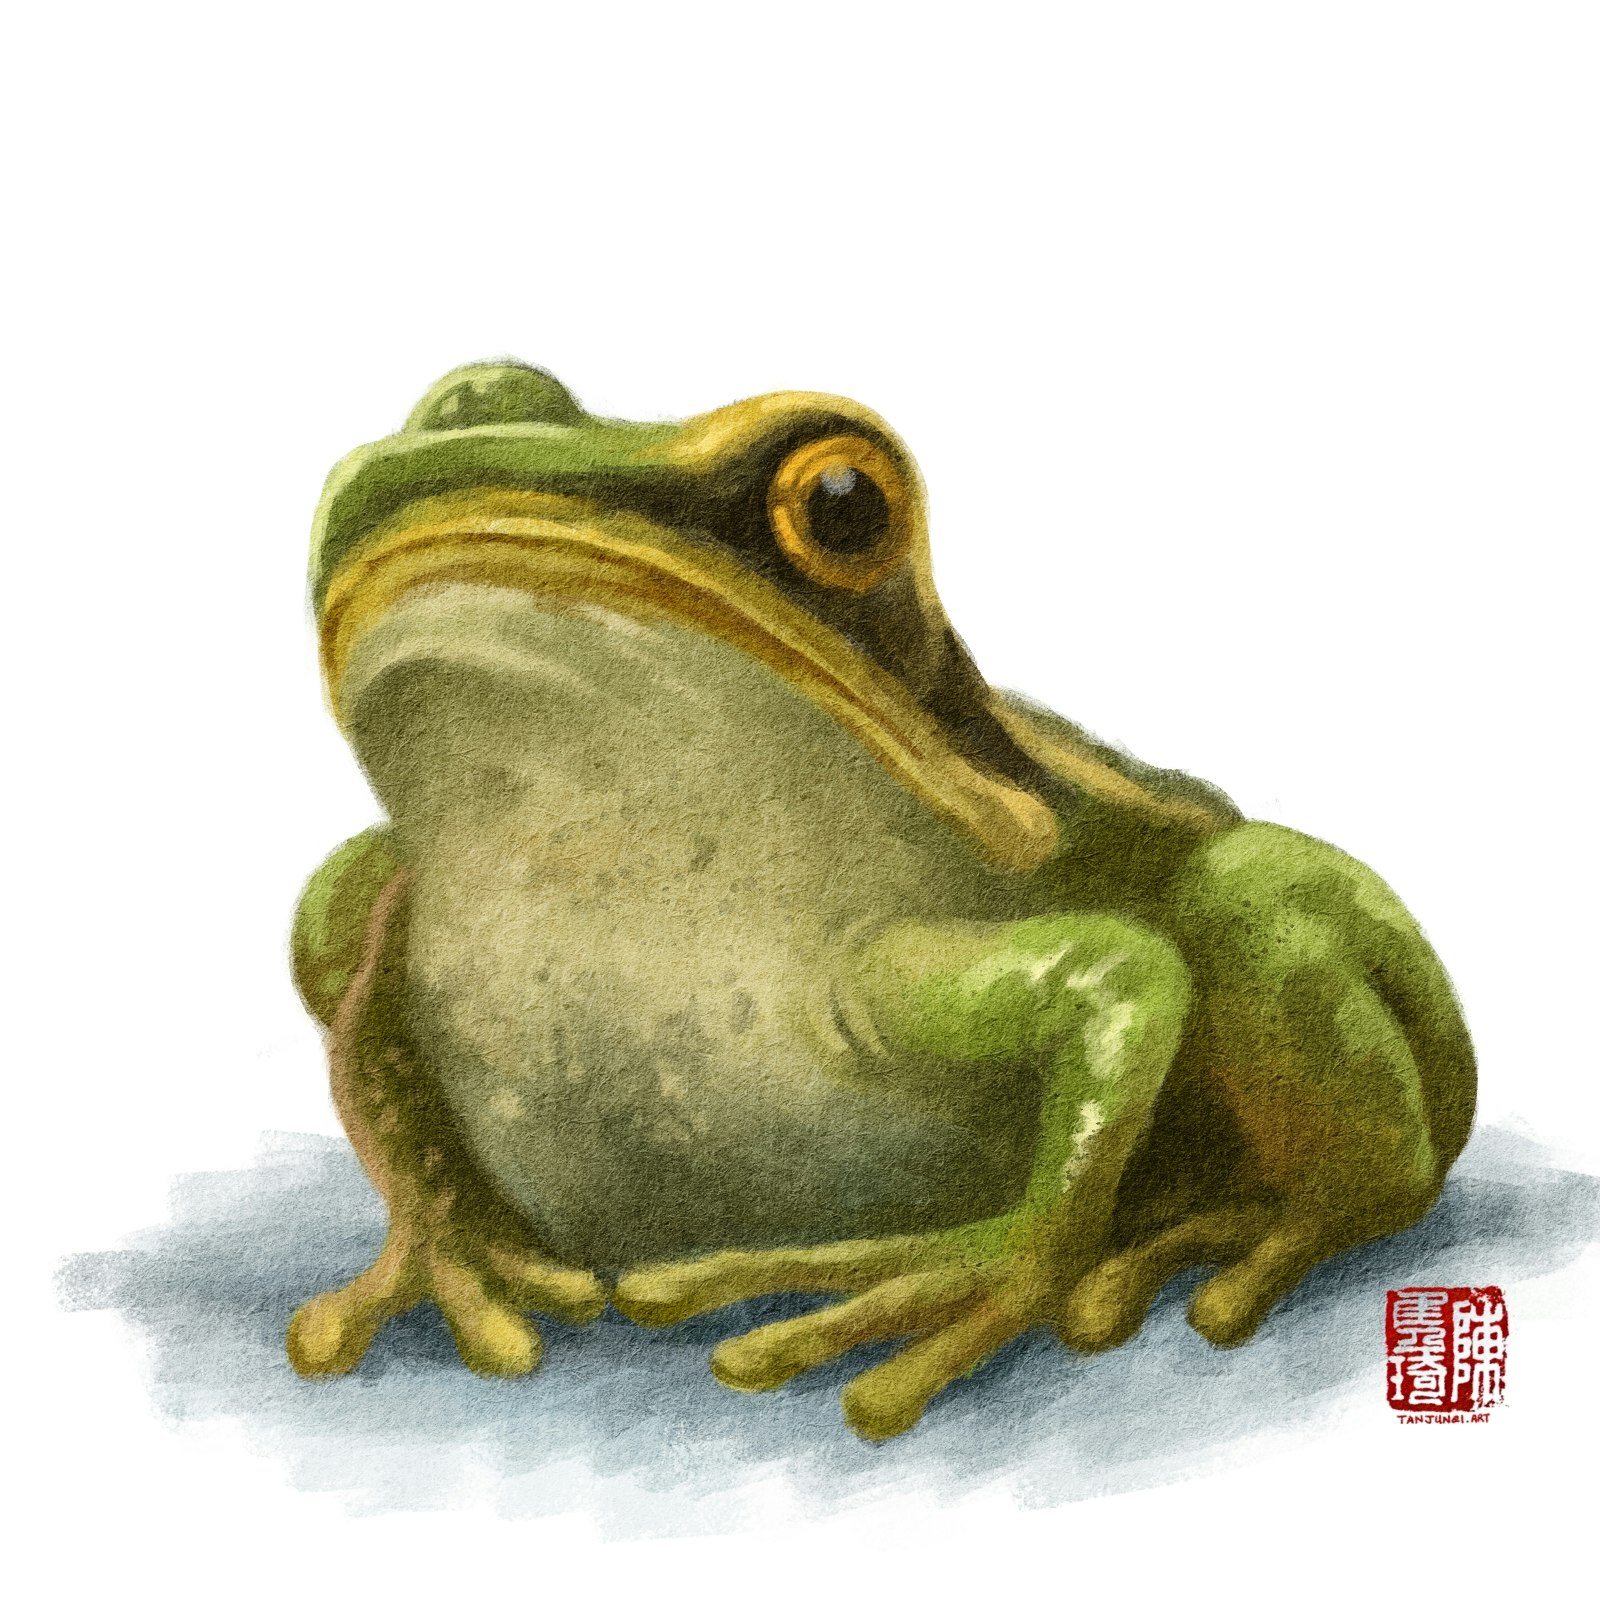 Simple spot digtal illustration of a common greenback frog from a frontal three-quarter view. The frog is in a resting position.